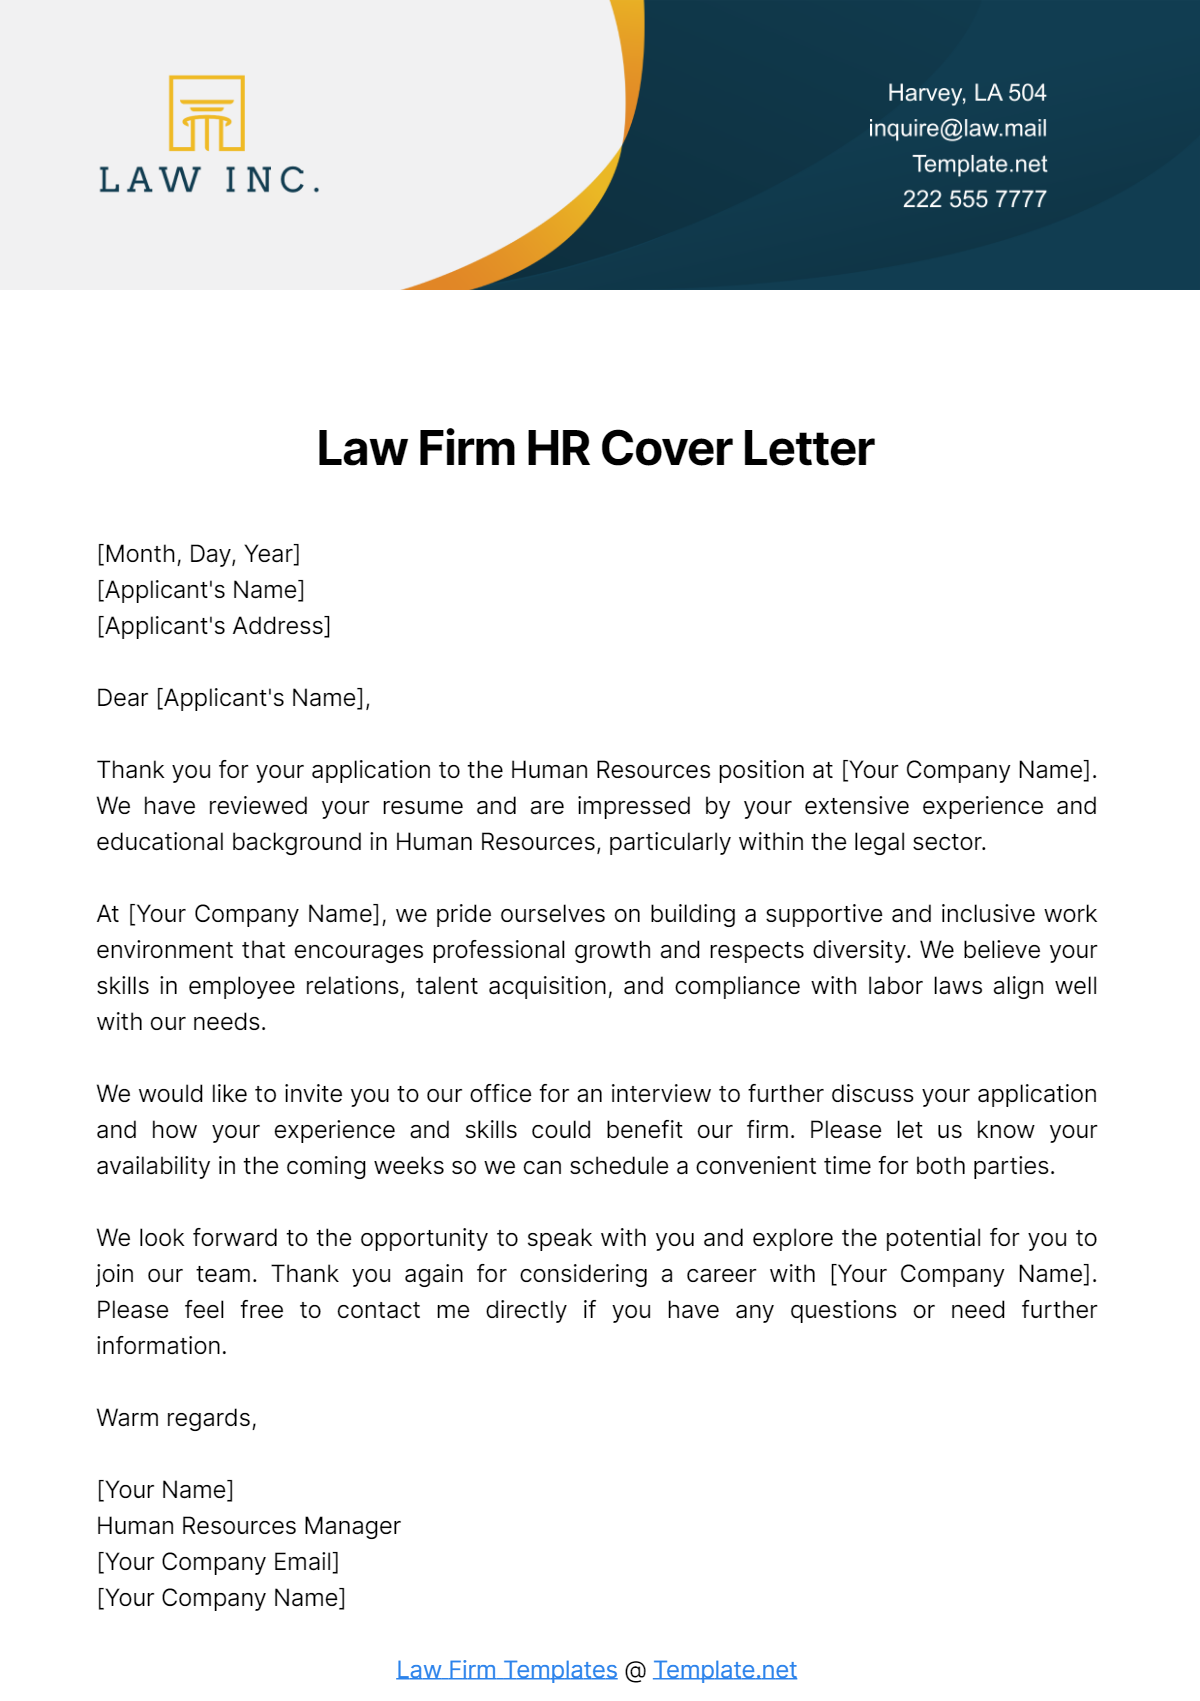 Law Firm HR Cover Letter Template